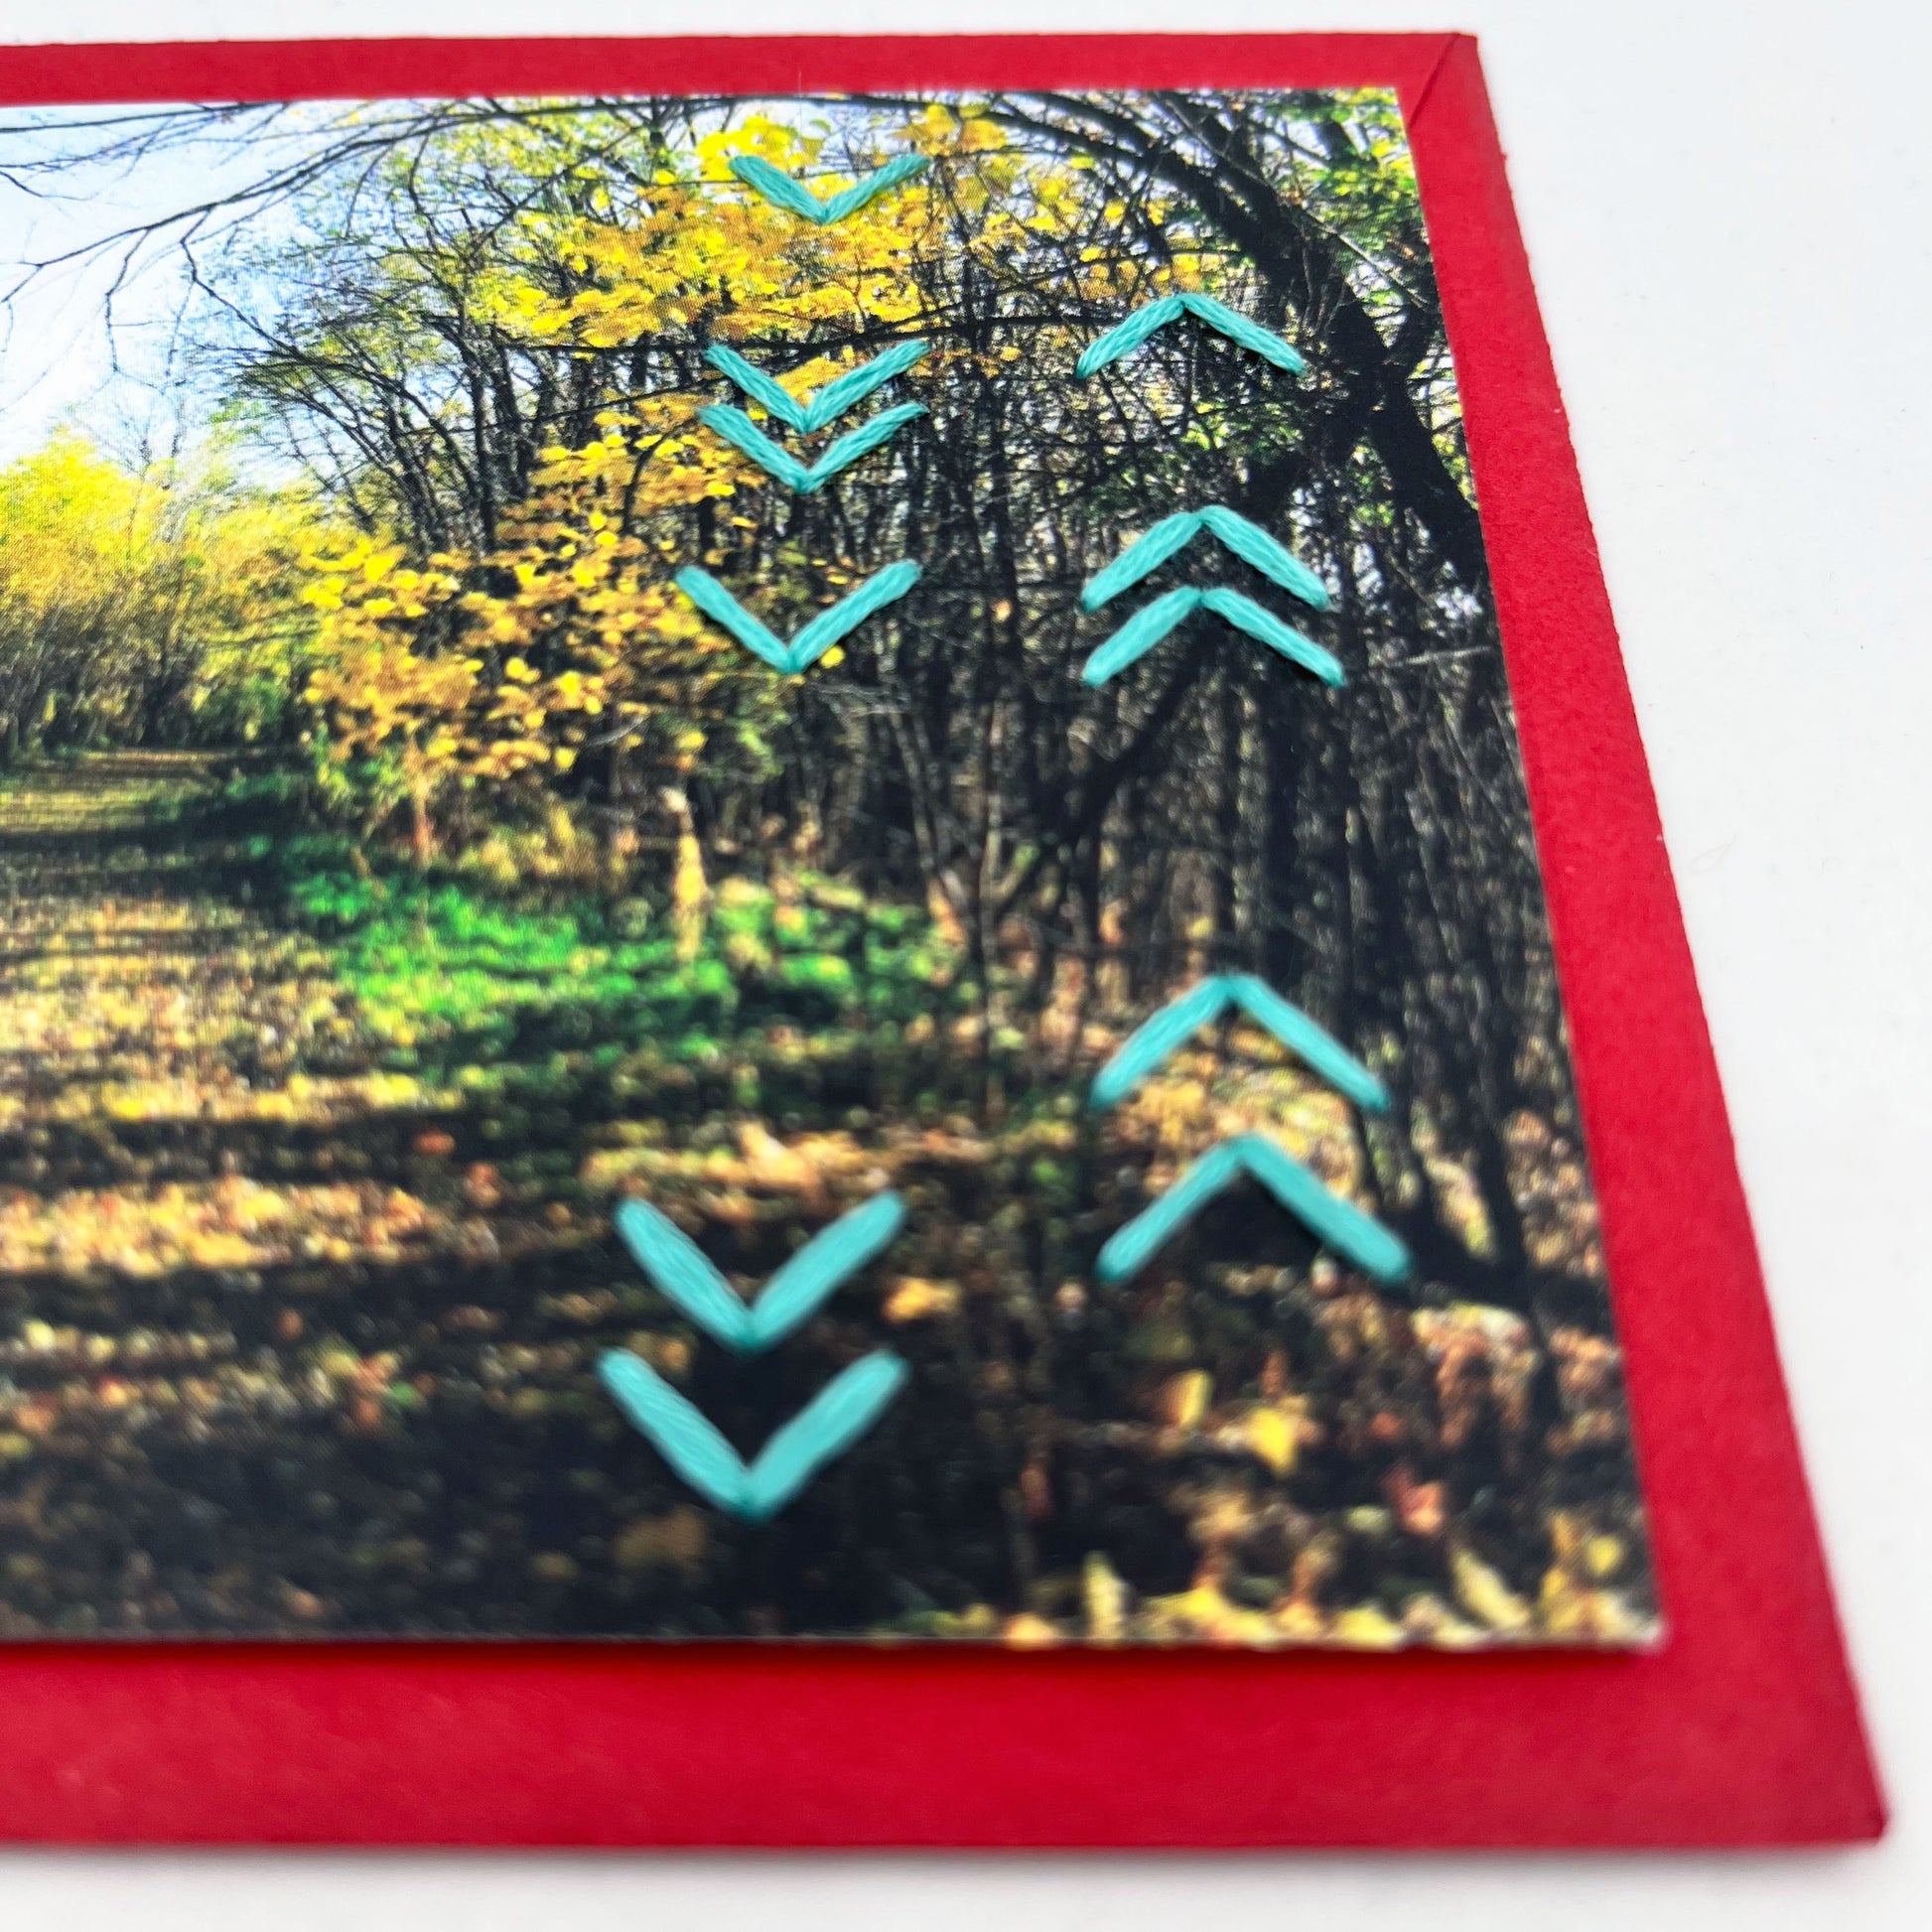 Greeting card flat on an envelope. Photo of a path through the woods in fall. Rows of aqua chevron stitches along right side card